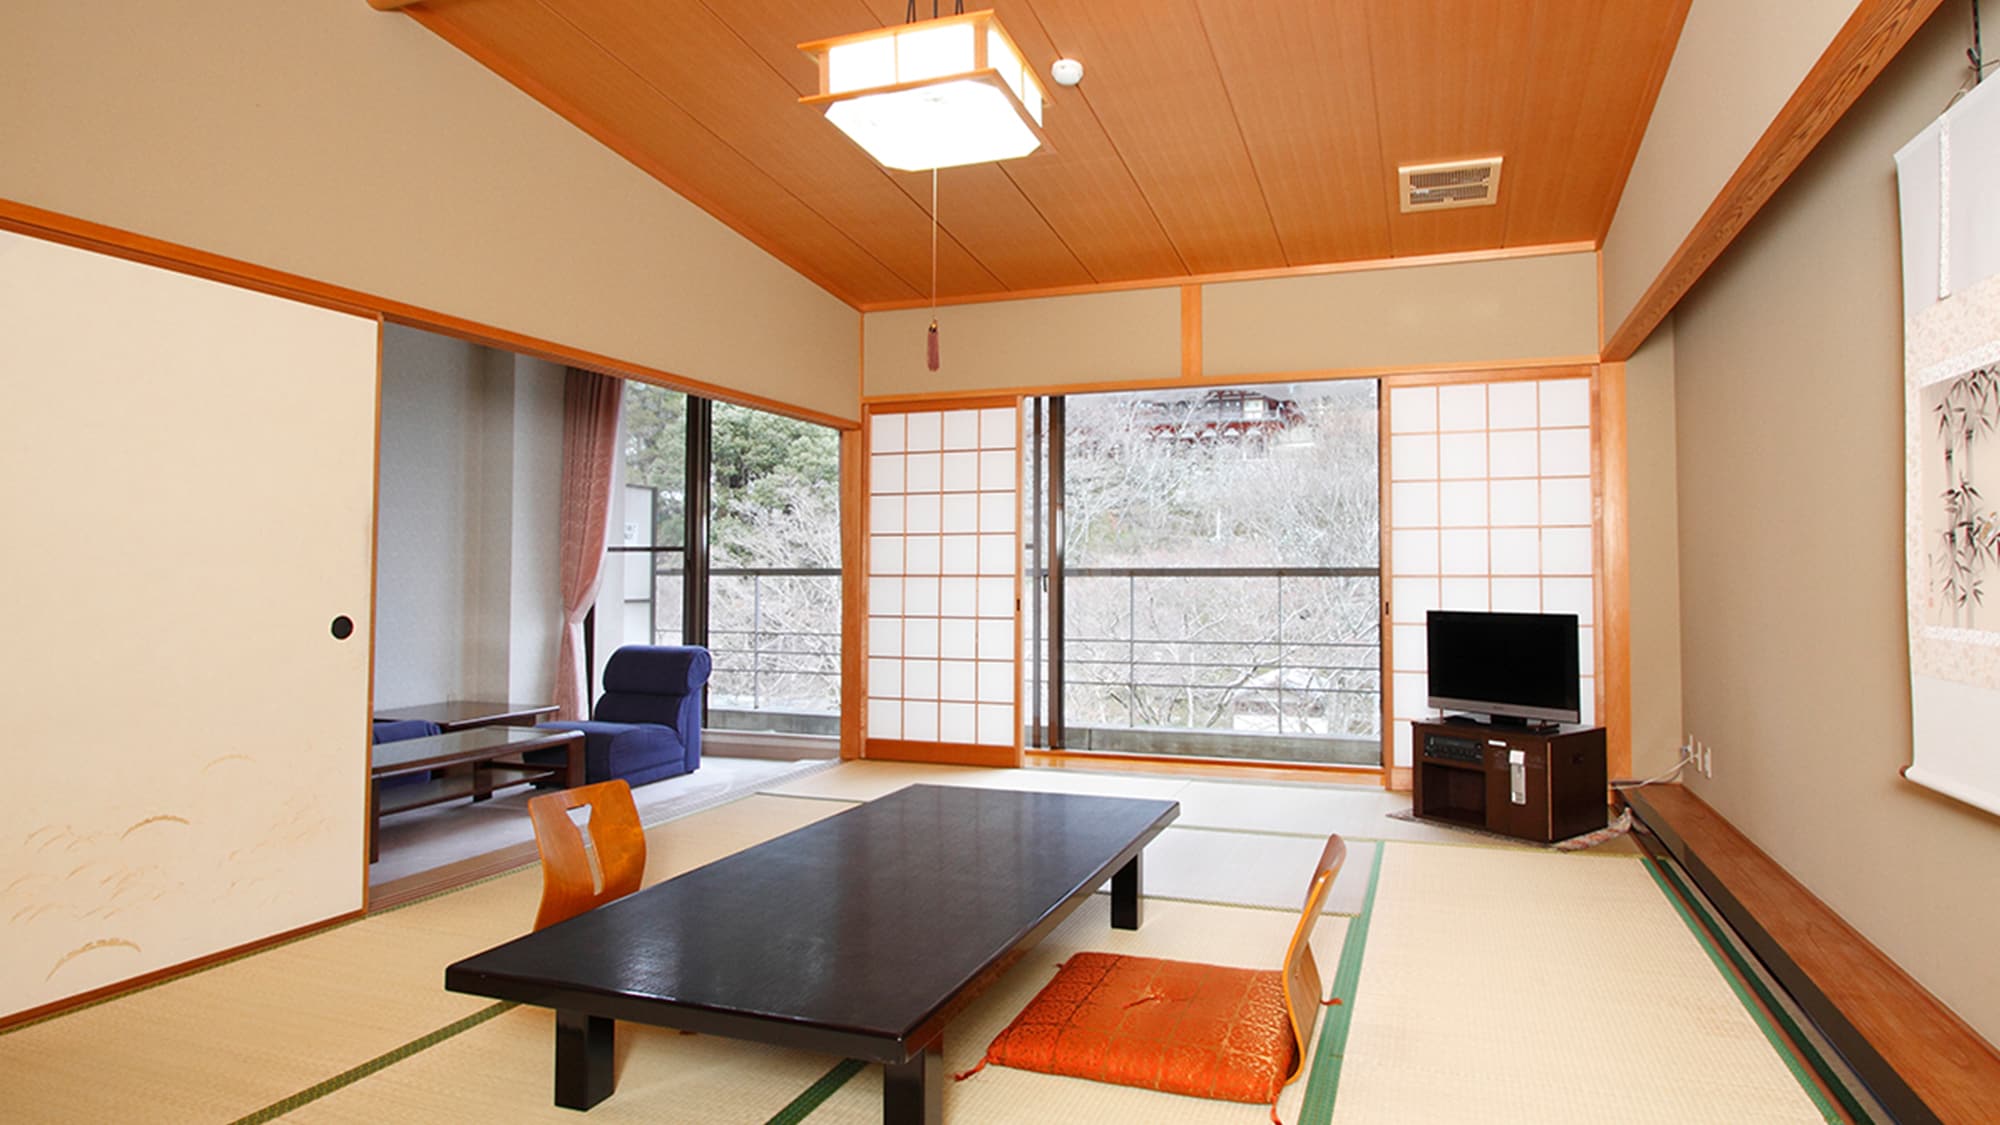 Room example (Japanese-style room in the East Building)